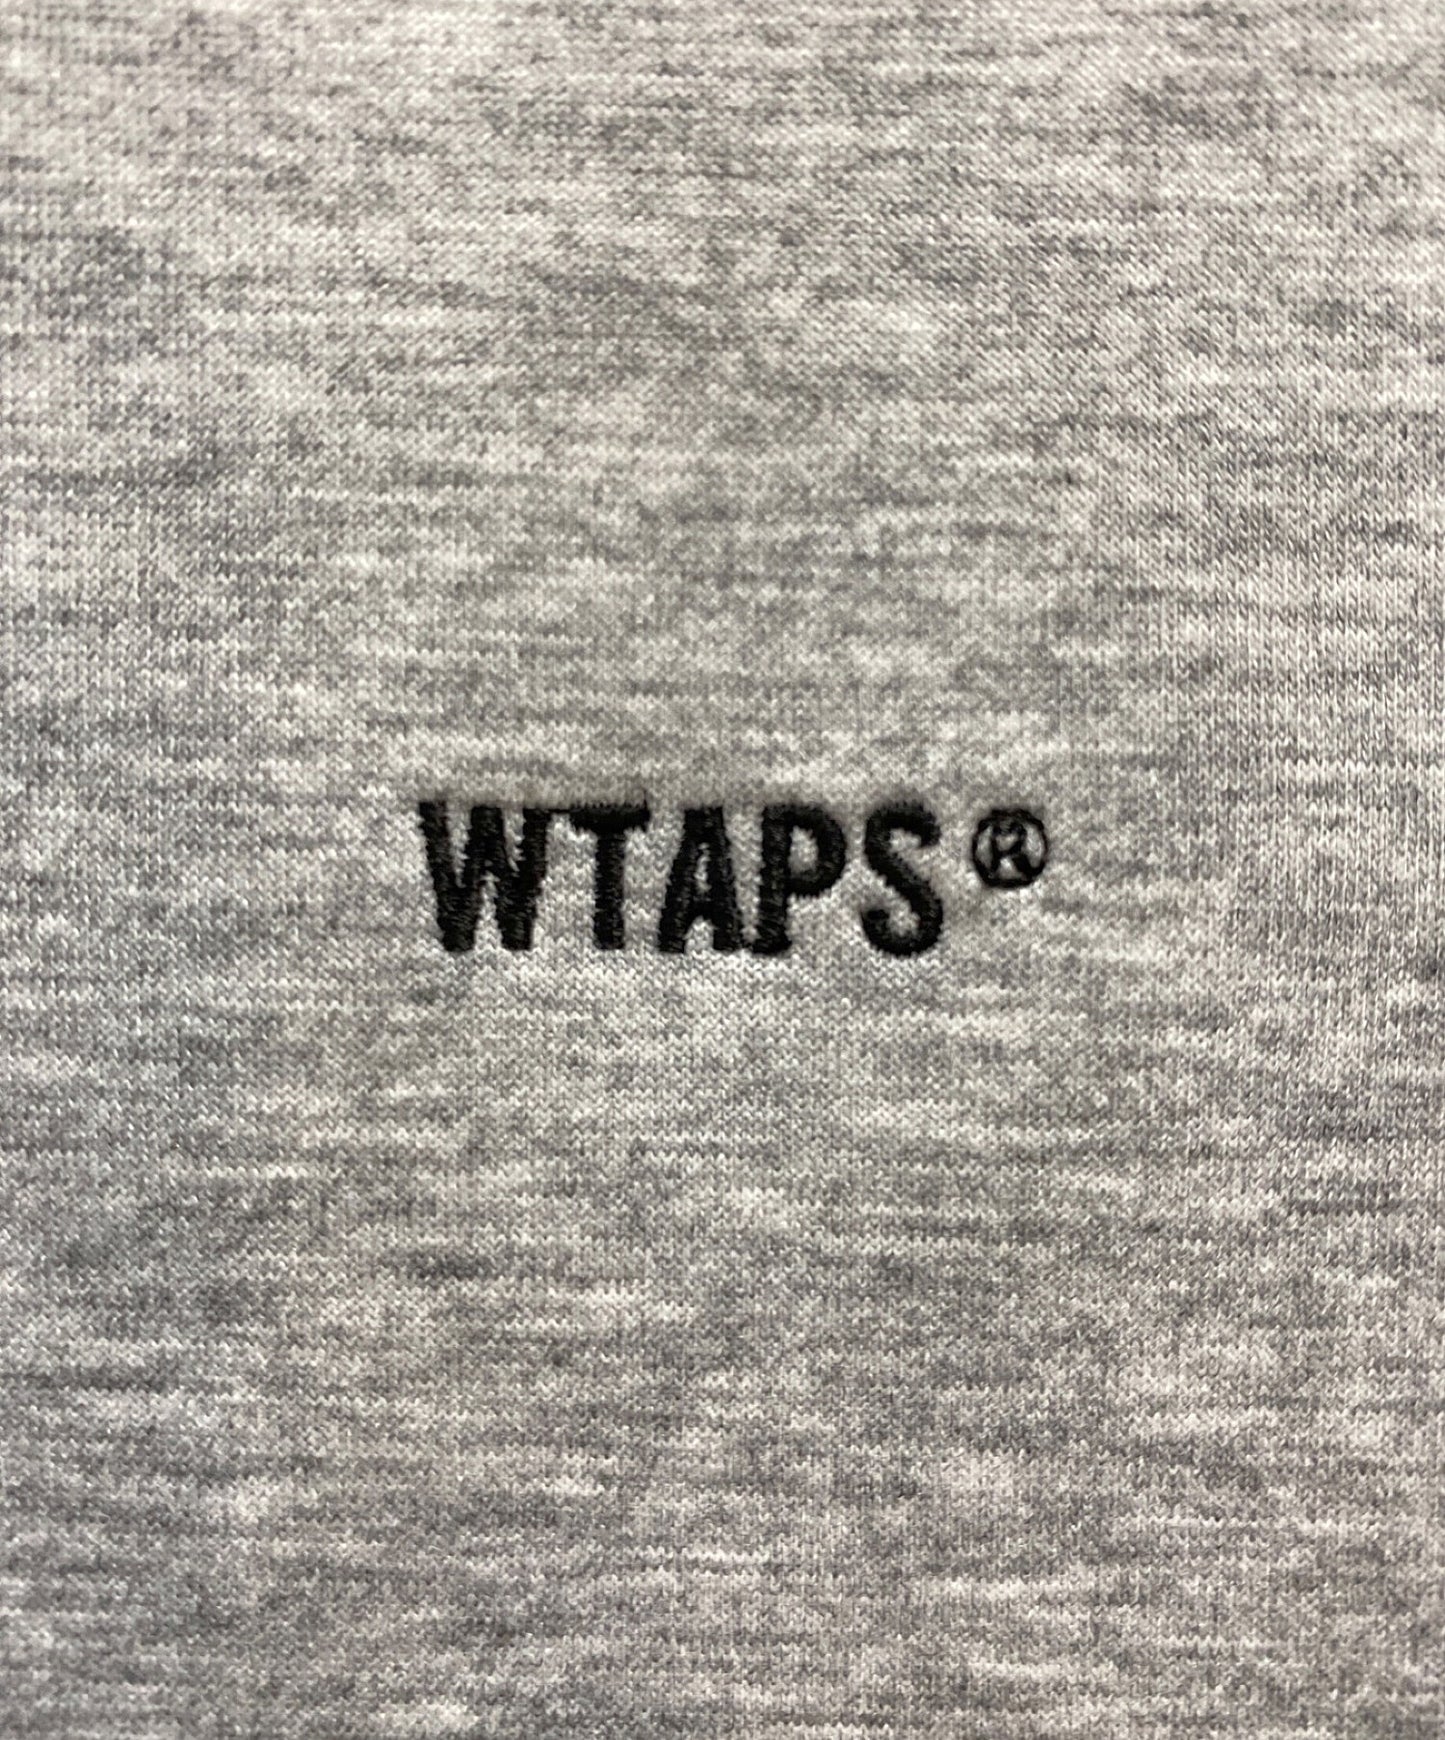 [Pre-owned] WTAPS pullover hoodie 231ATDT-CSM05